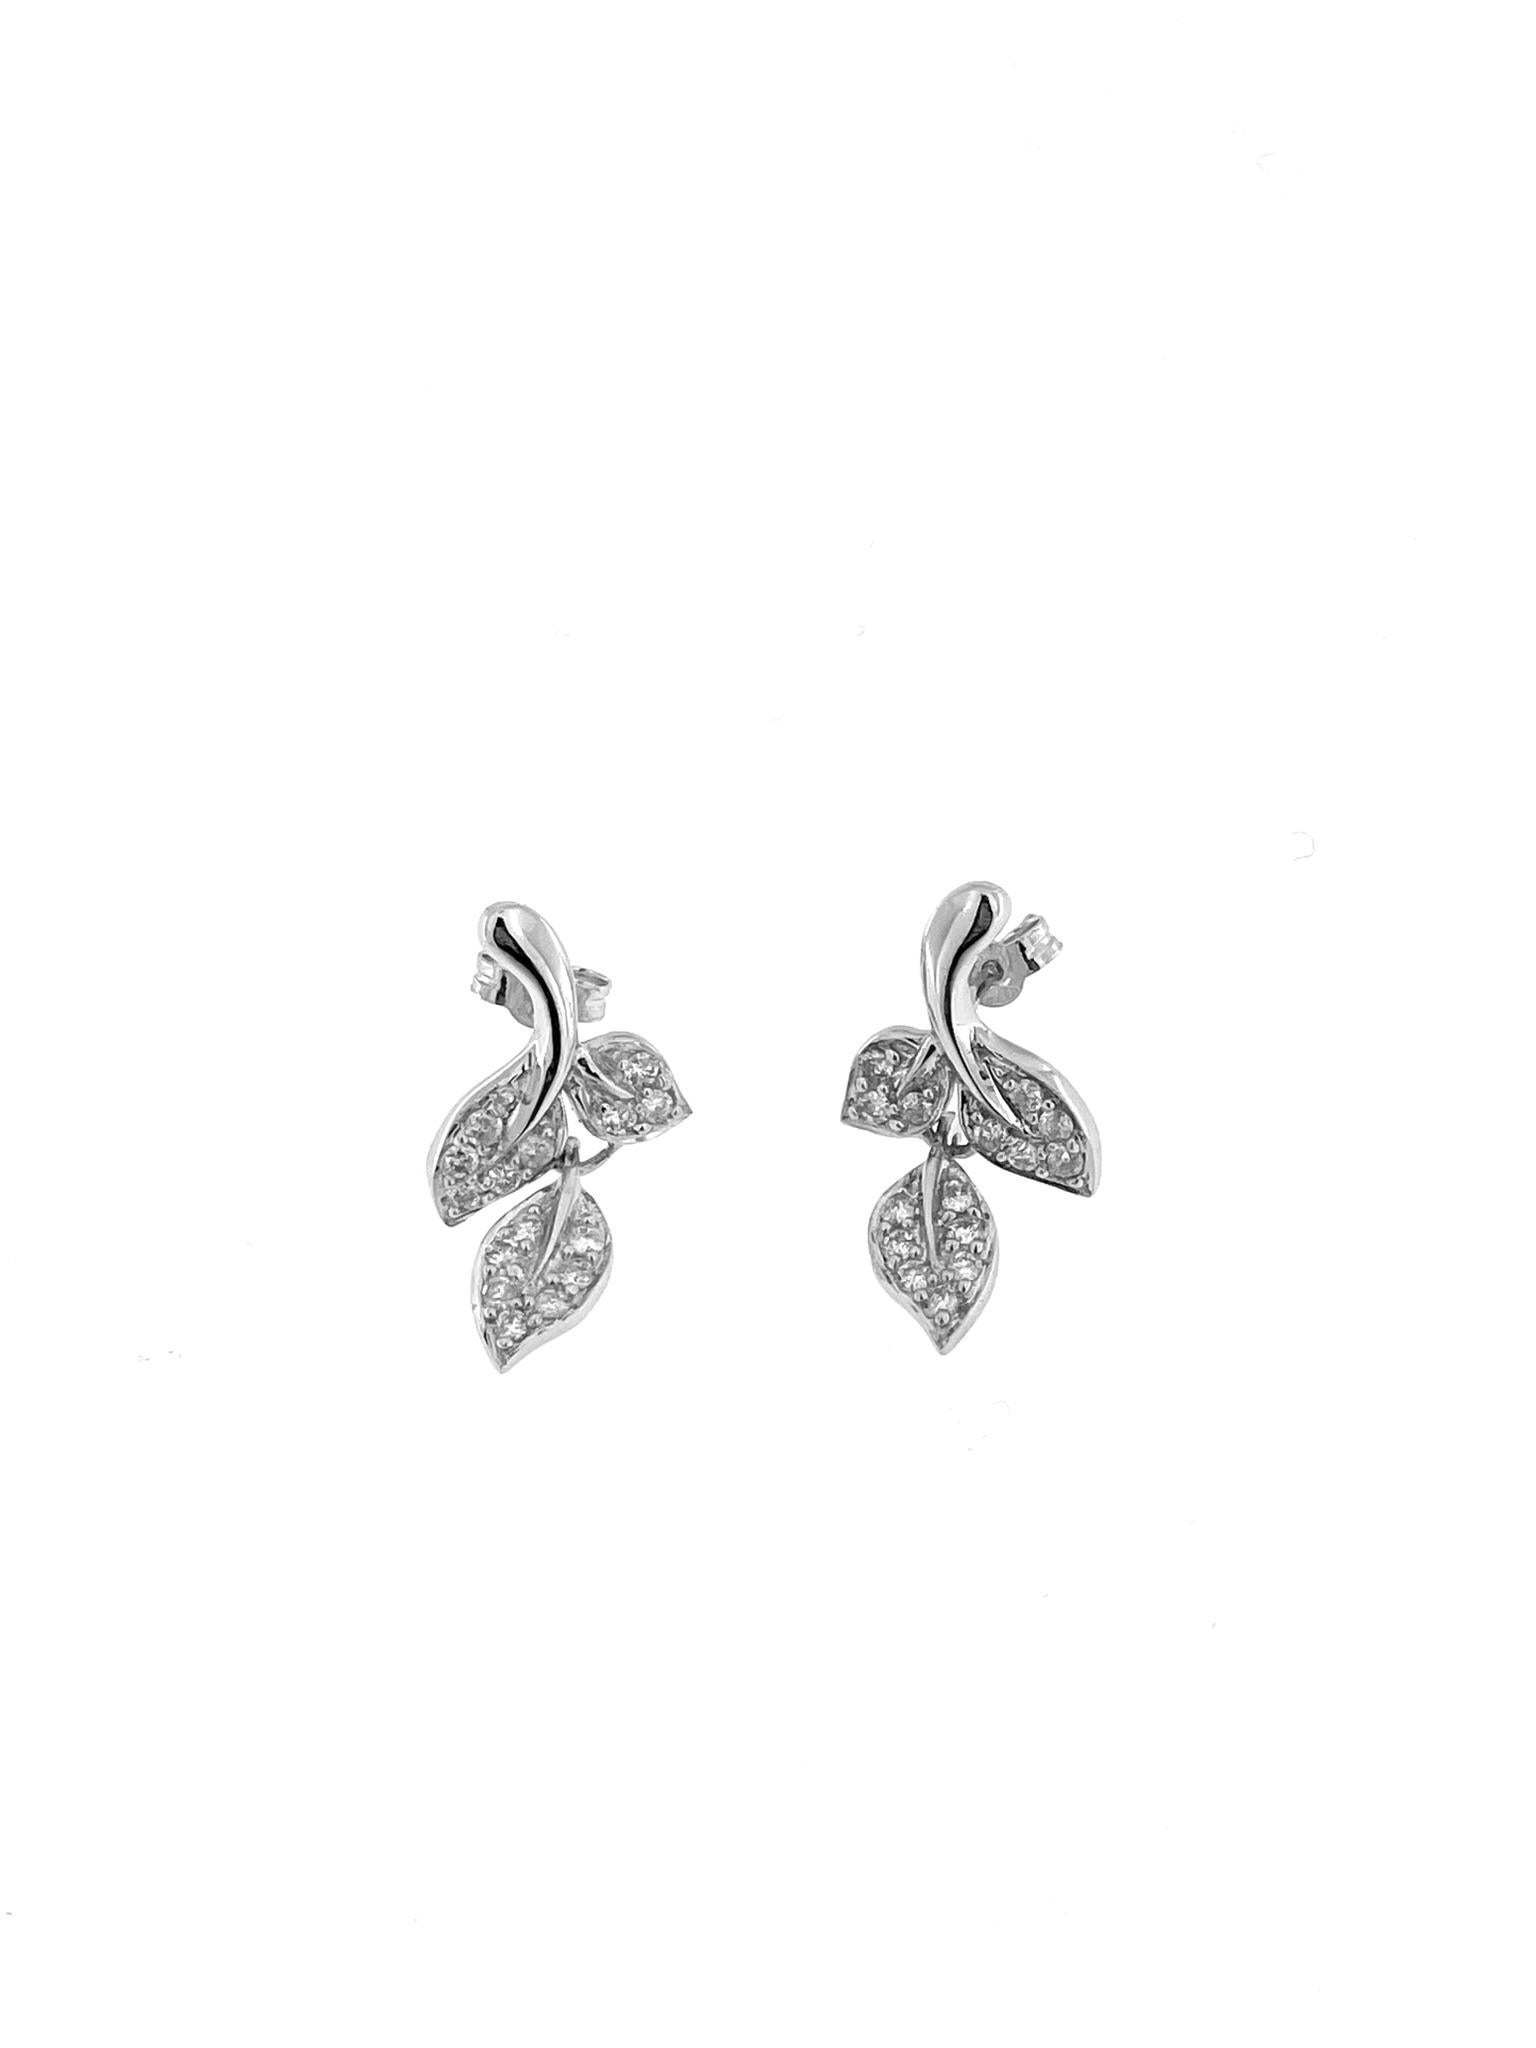 Modern Earrings and Ring Leaf Design Set White Gold and Diamonds For Sale 4